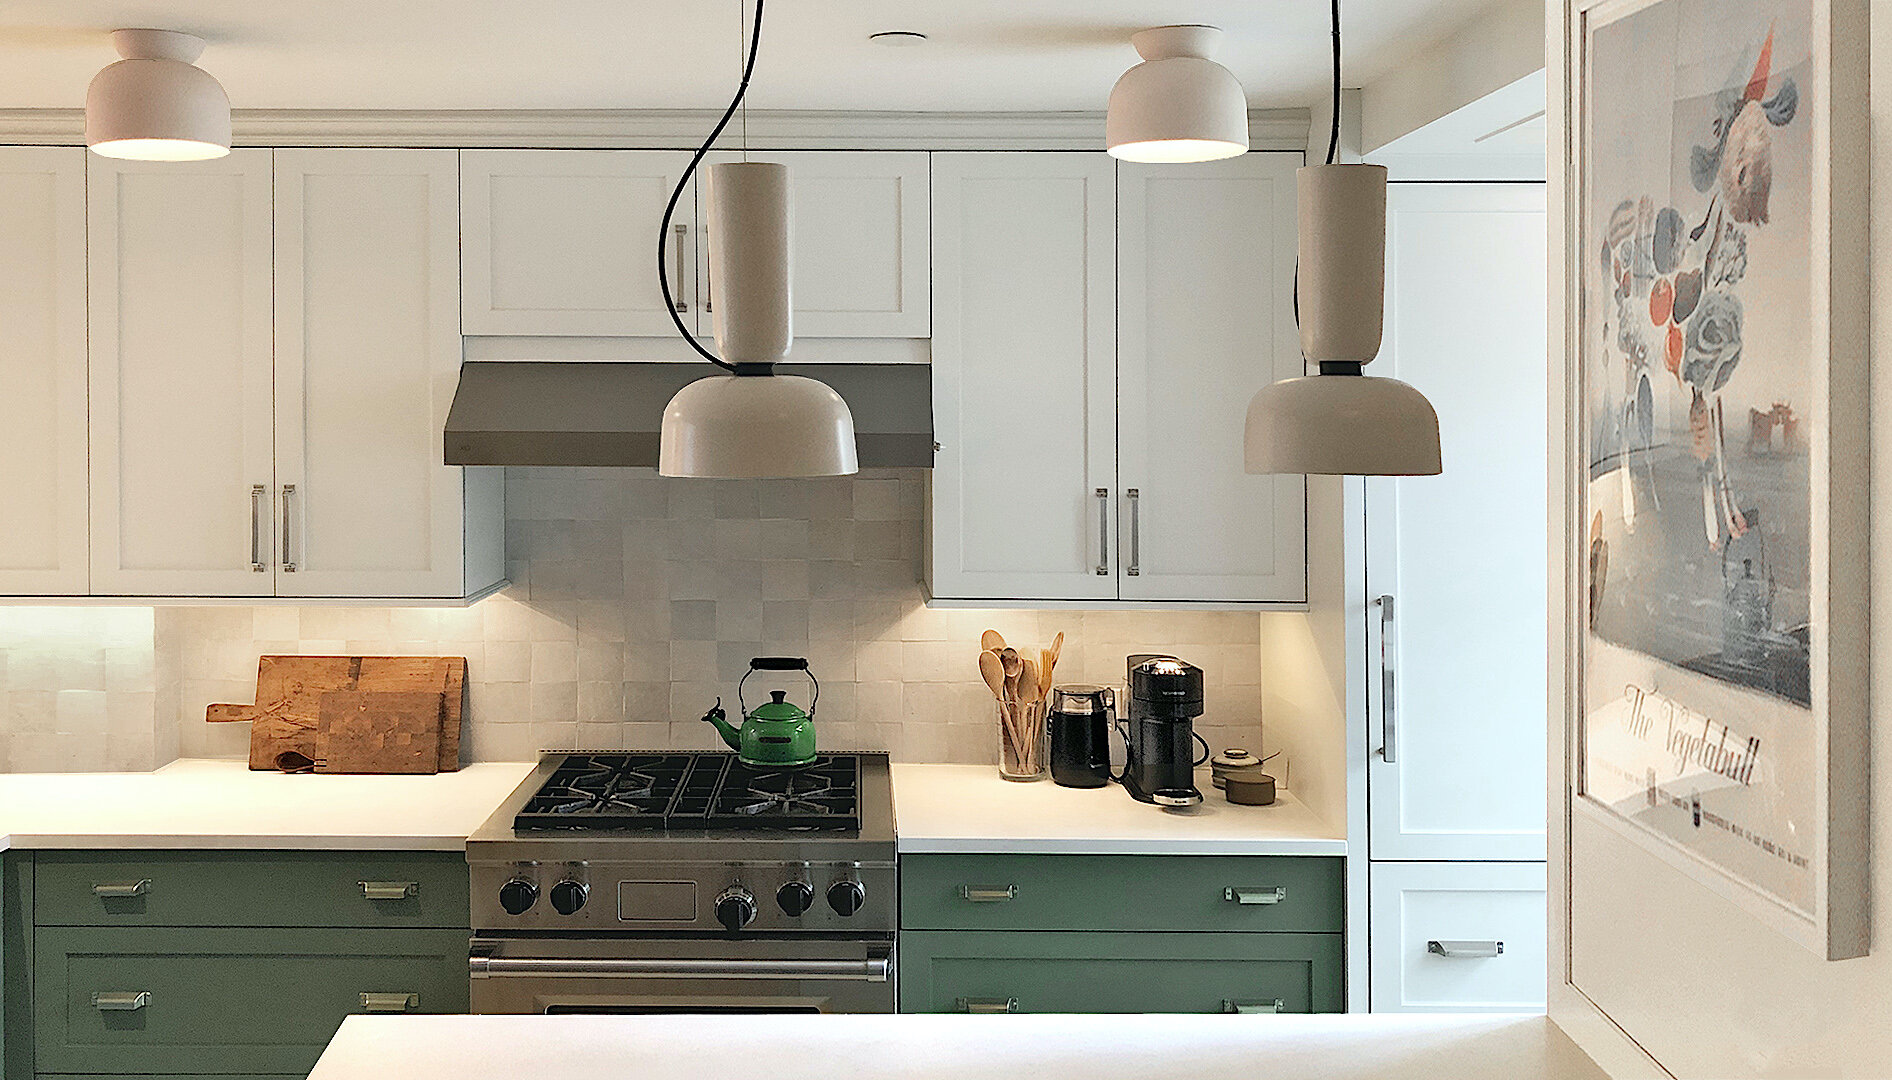 Crisco_and_Frisco_Society Hill Townhouse_Kitchen.jpg